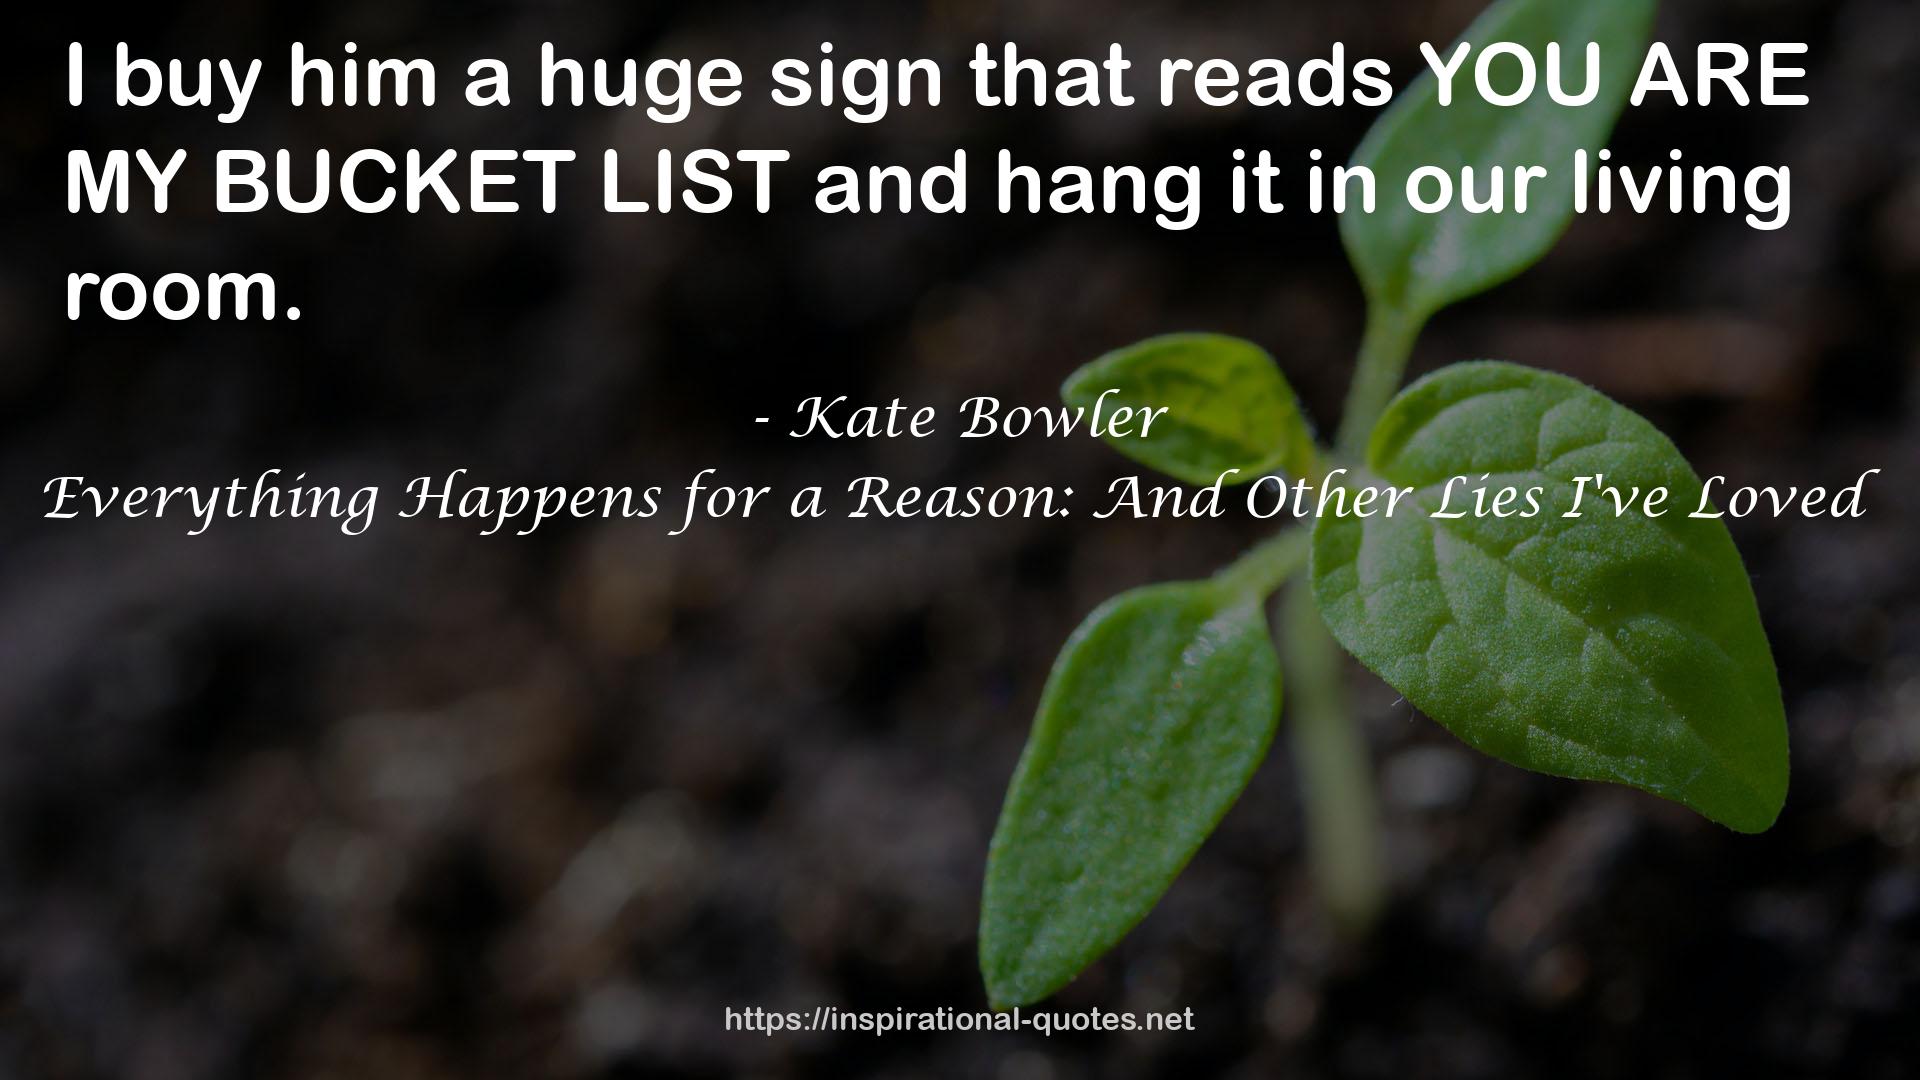 Kate Bowler QUOTES